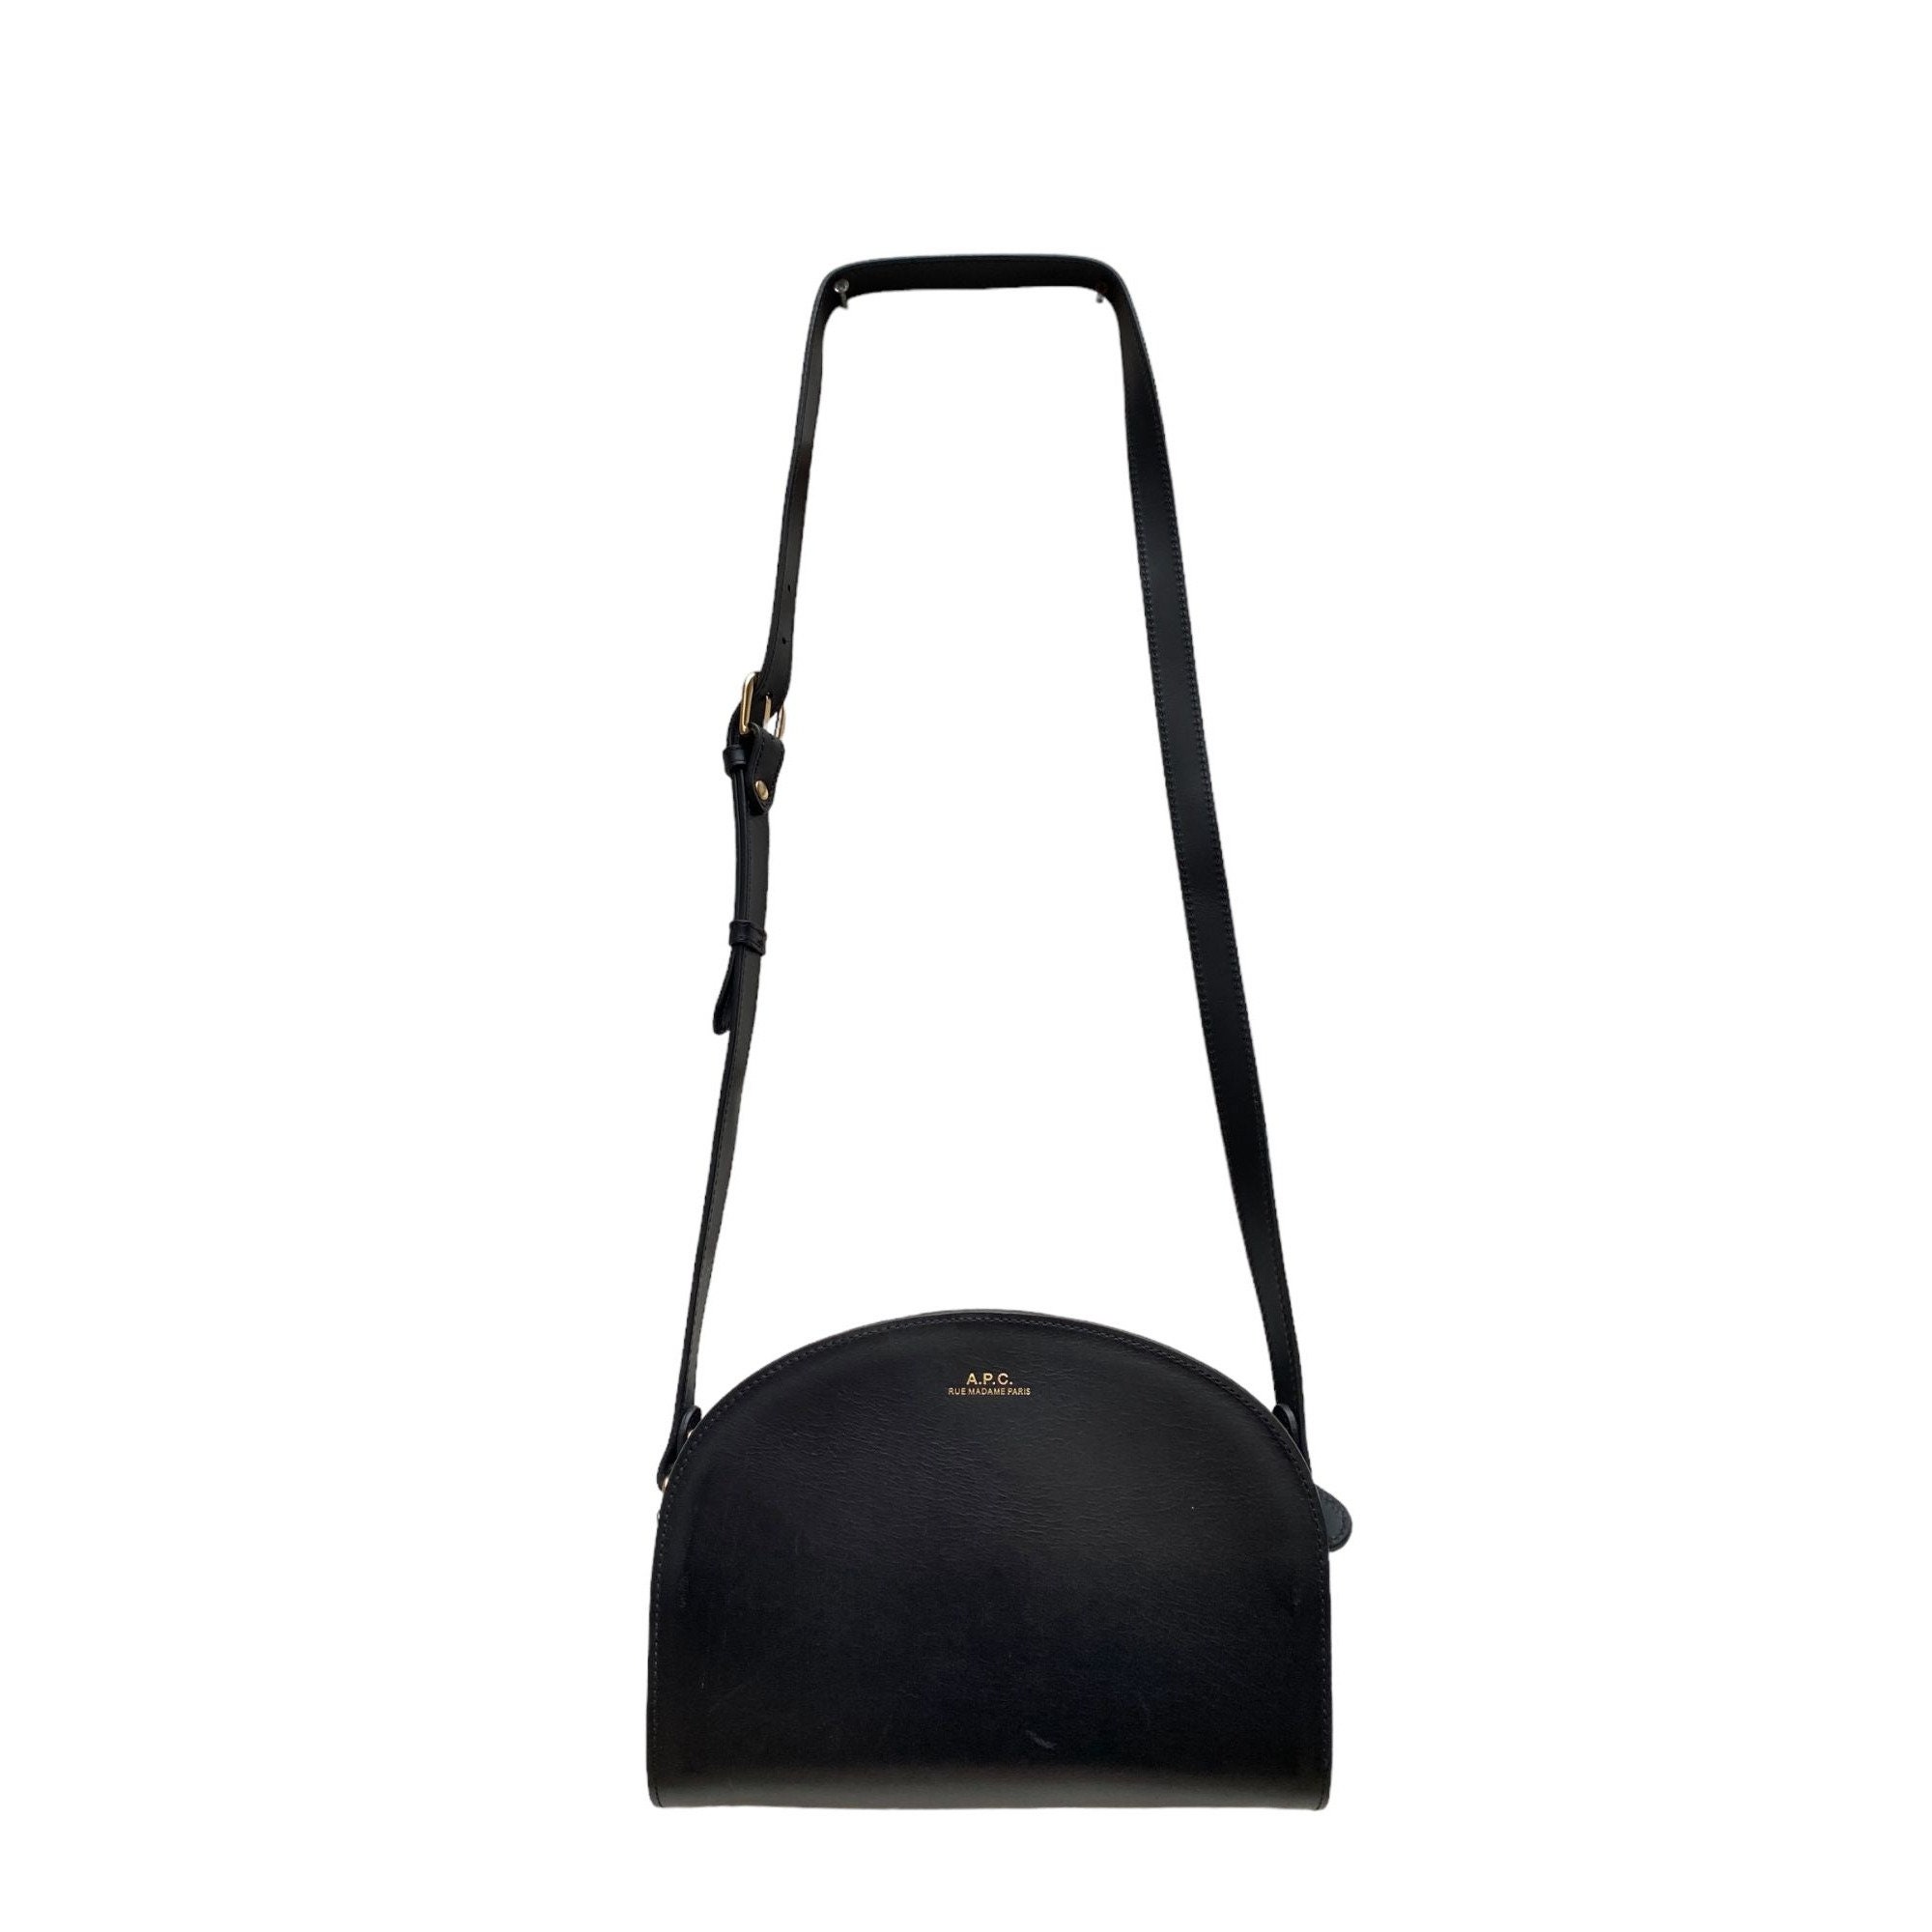 Sold at Auction: Gucci Black Leather Half Moon Flat Hobo Bag Serial  #001.115.1206